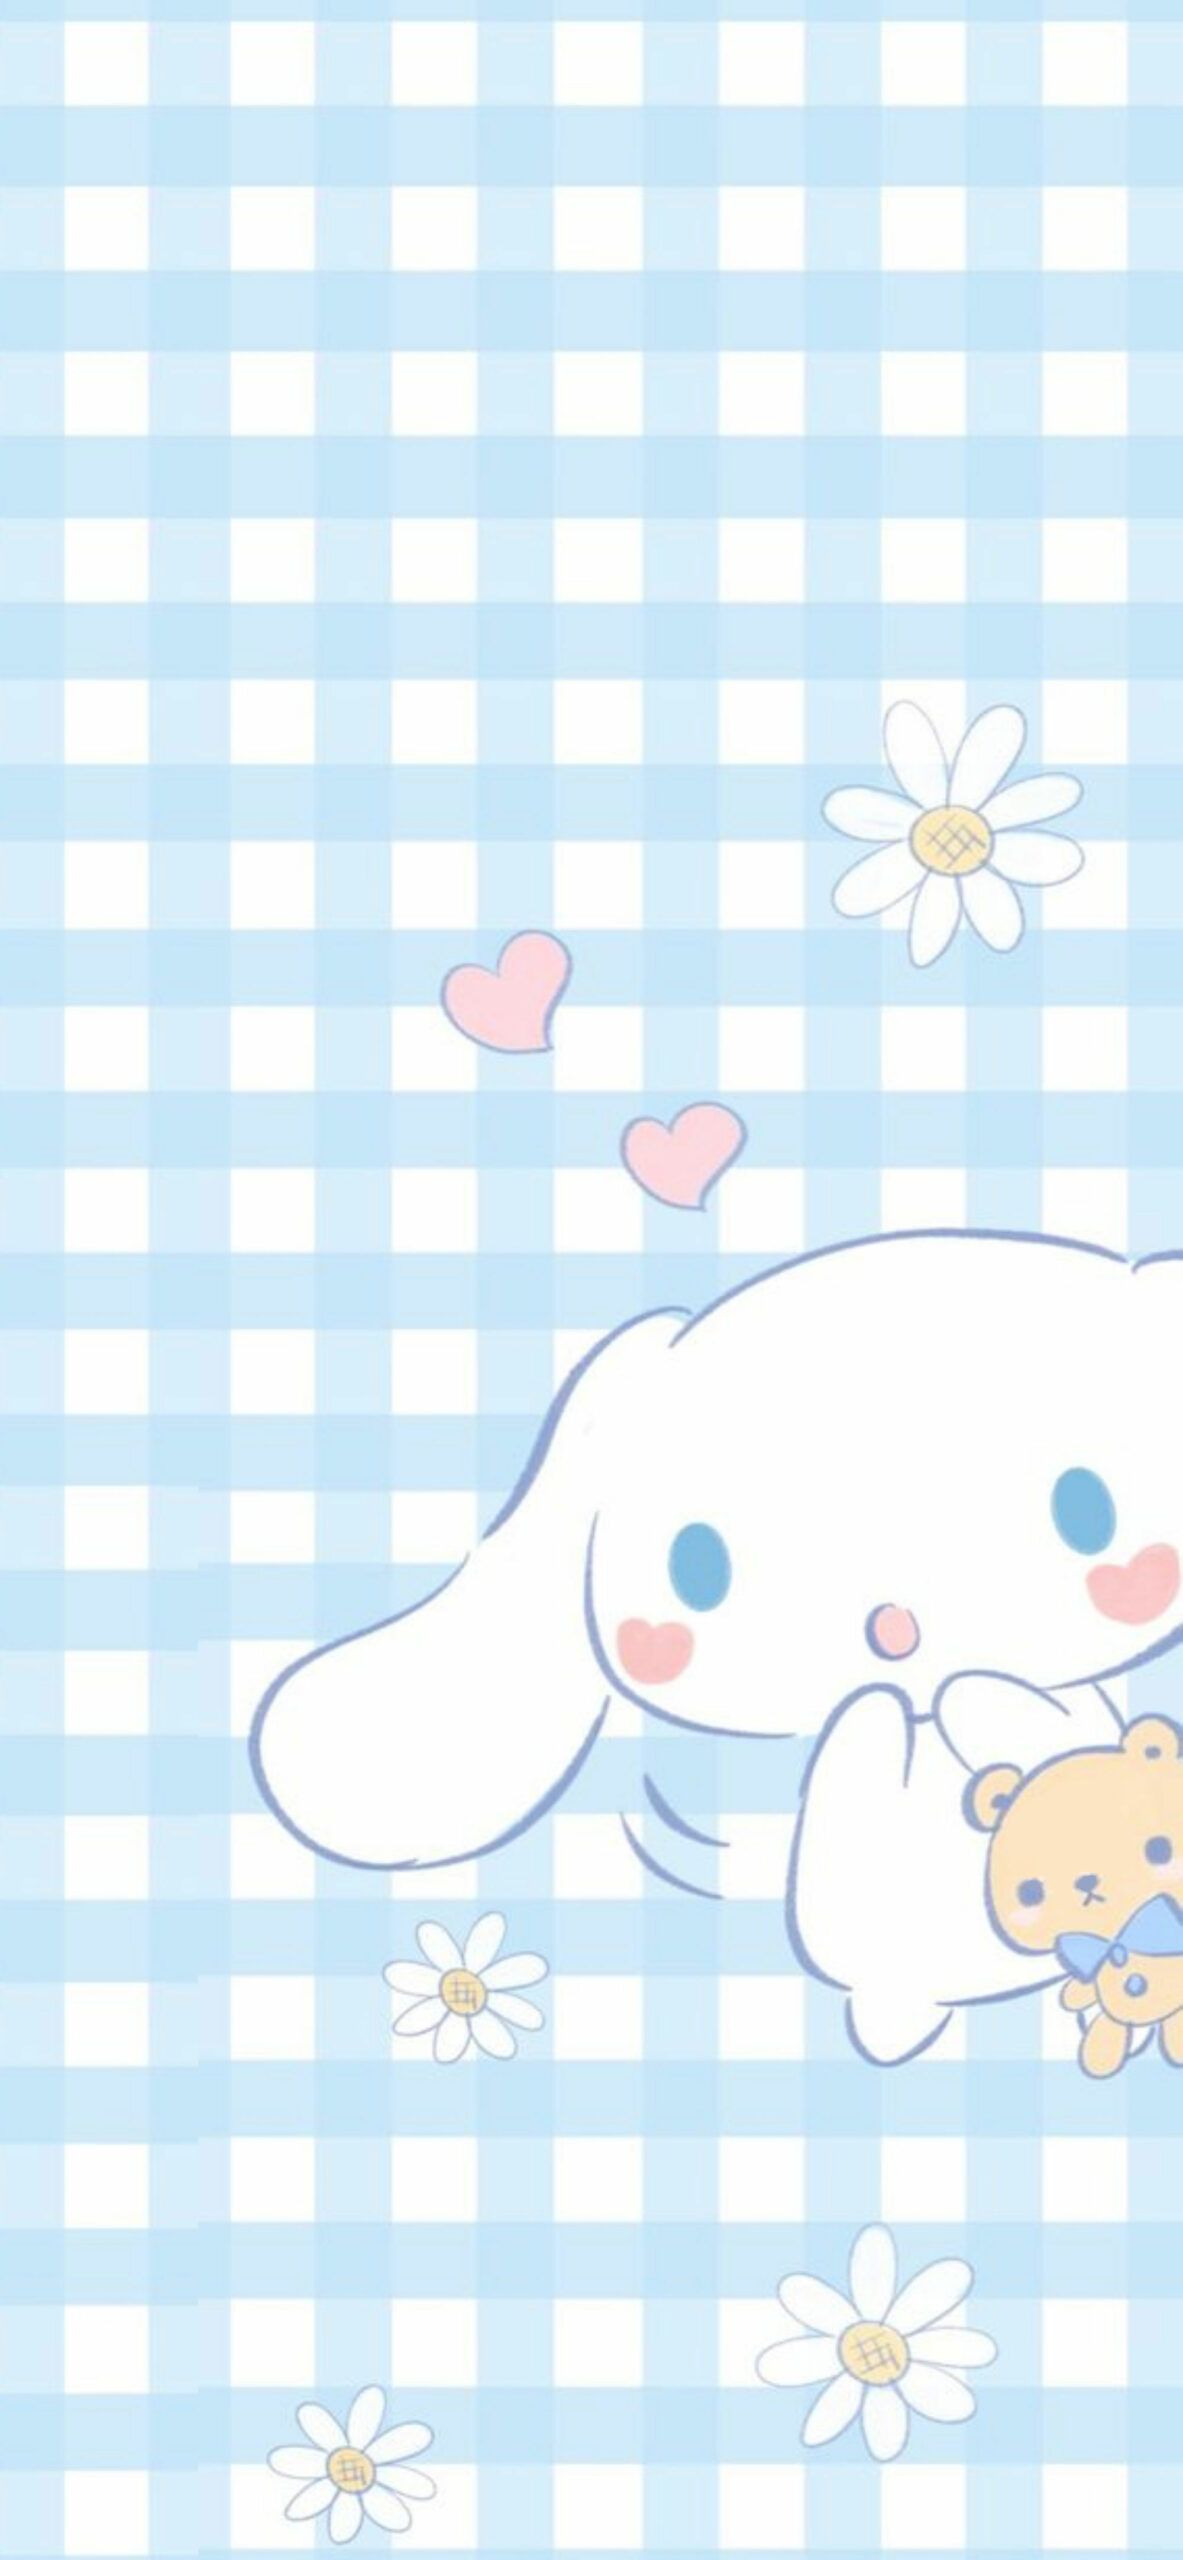 Sanrio characters on a blue and white checkered background - Cinnamoroll, Sanrio